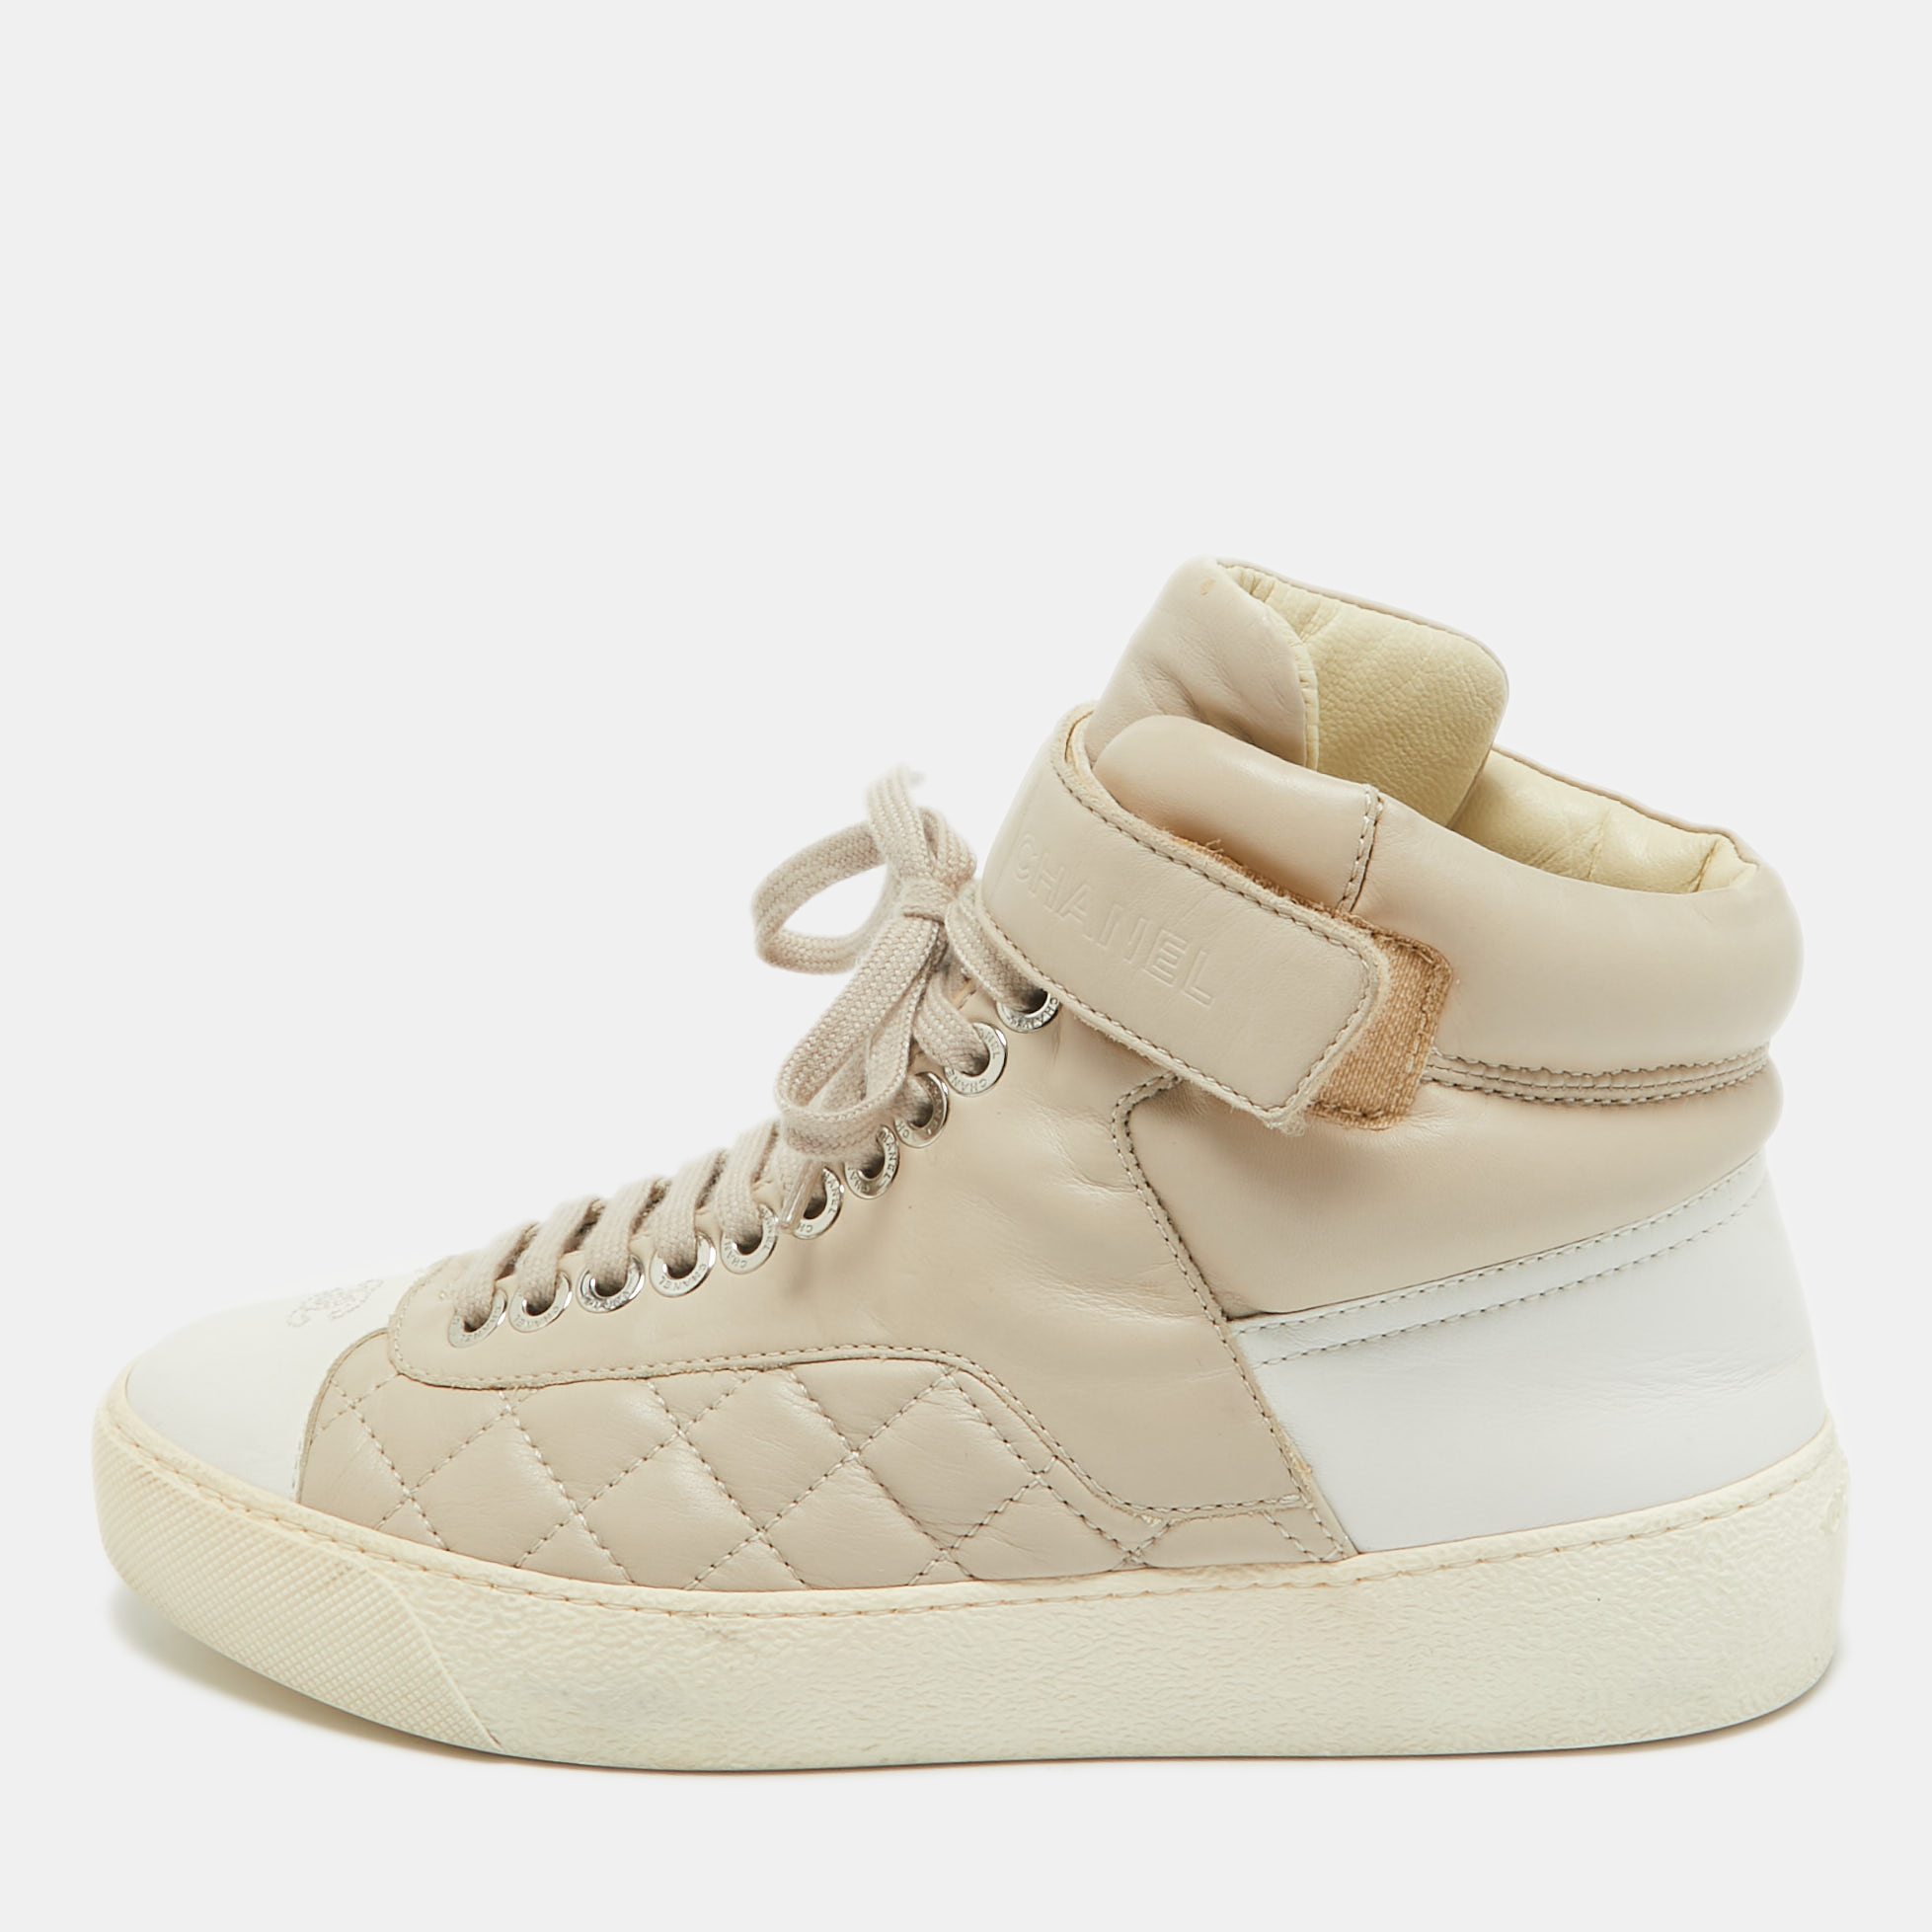 Chanel white/pink quilted leather cc high top sneakers size 35